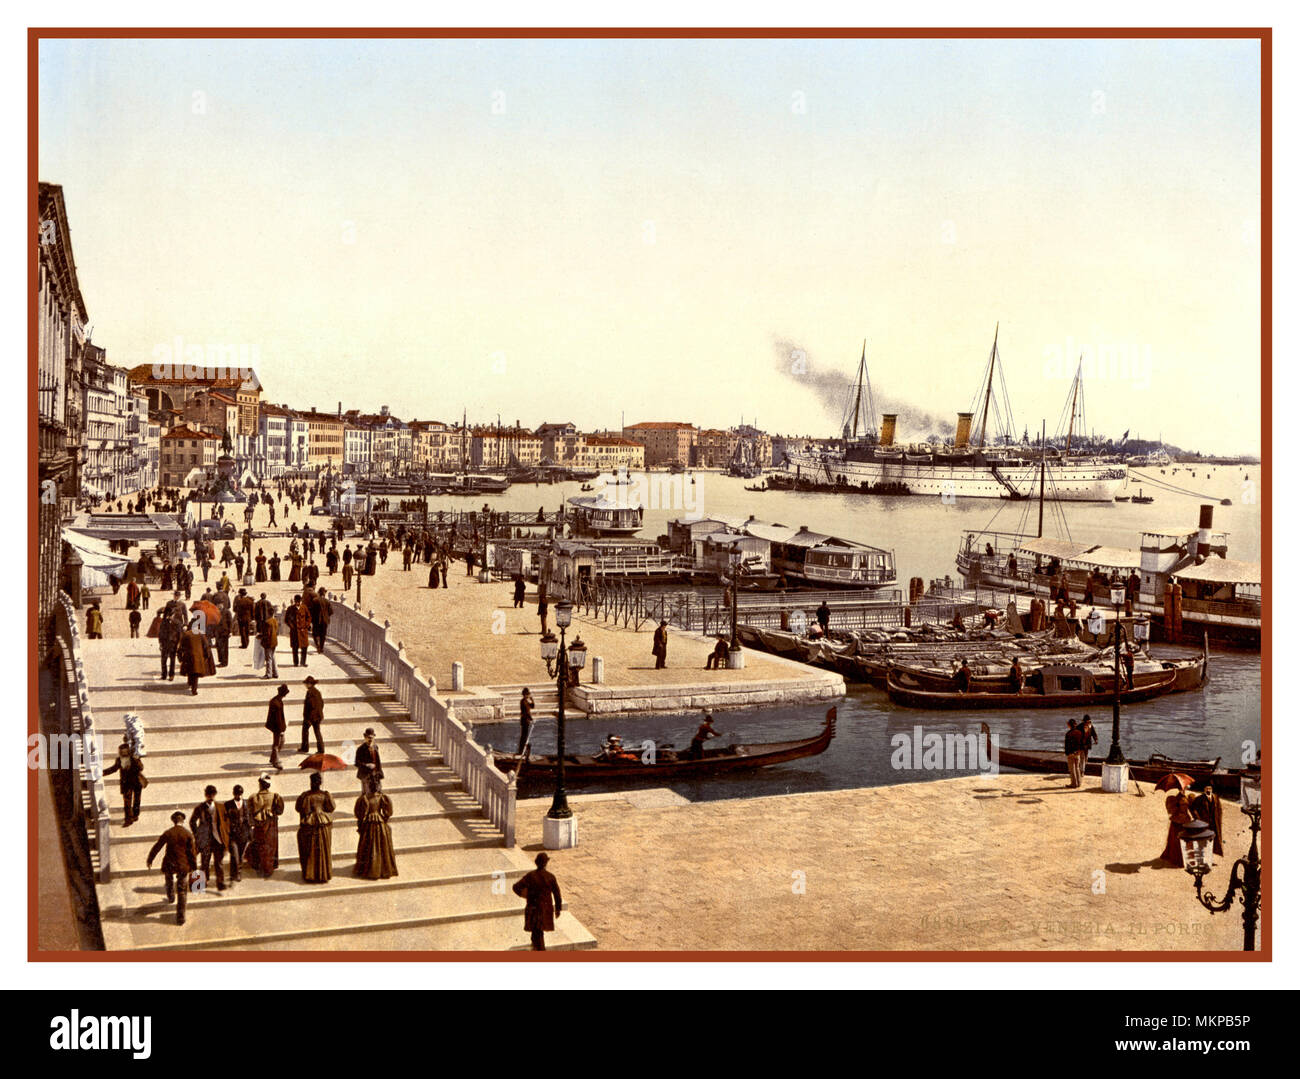 VENICE Old Historic Photochrom Venice harbor with old steam ship SMY Hohenzollern II in background. The Imperial Yacht used by Kaiser Wilhelm II Viewed from Doge's Palace (Palazzo Ducale) Palazzo del Doge di Venezia, Venice Italy 1890-1900 Stock Photo